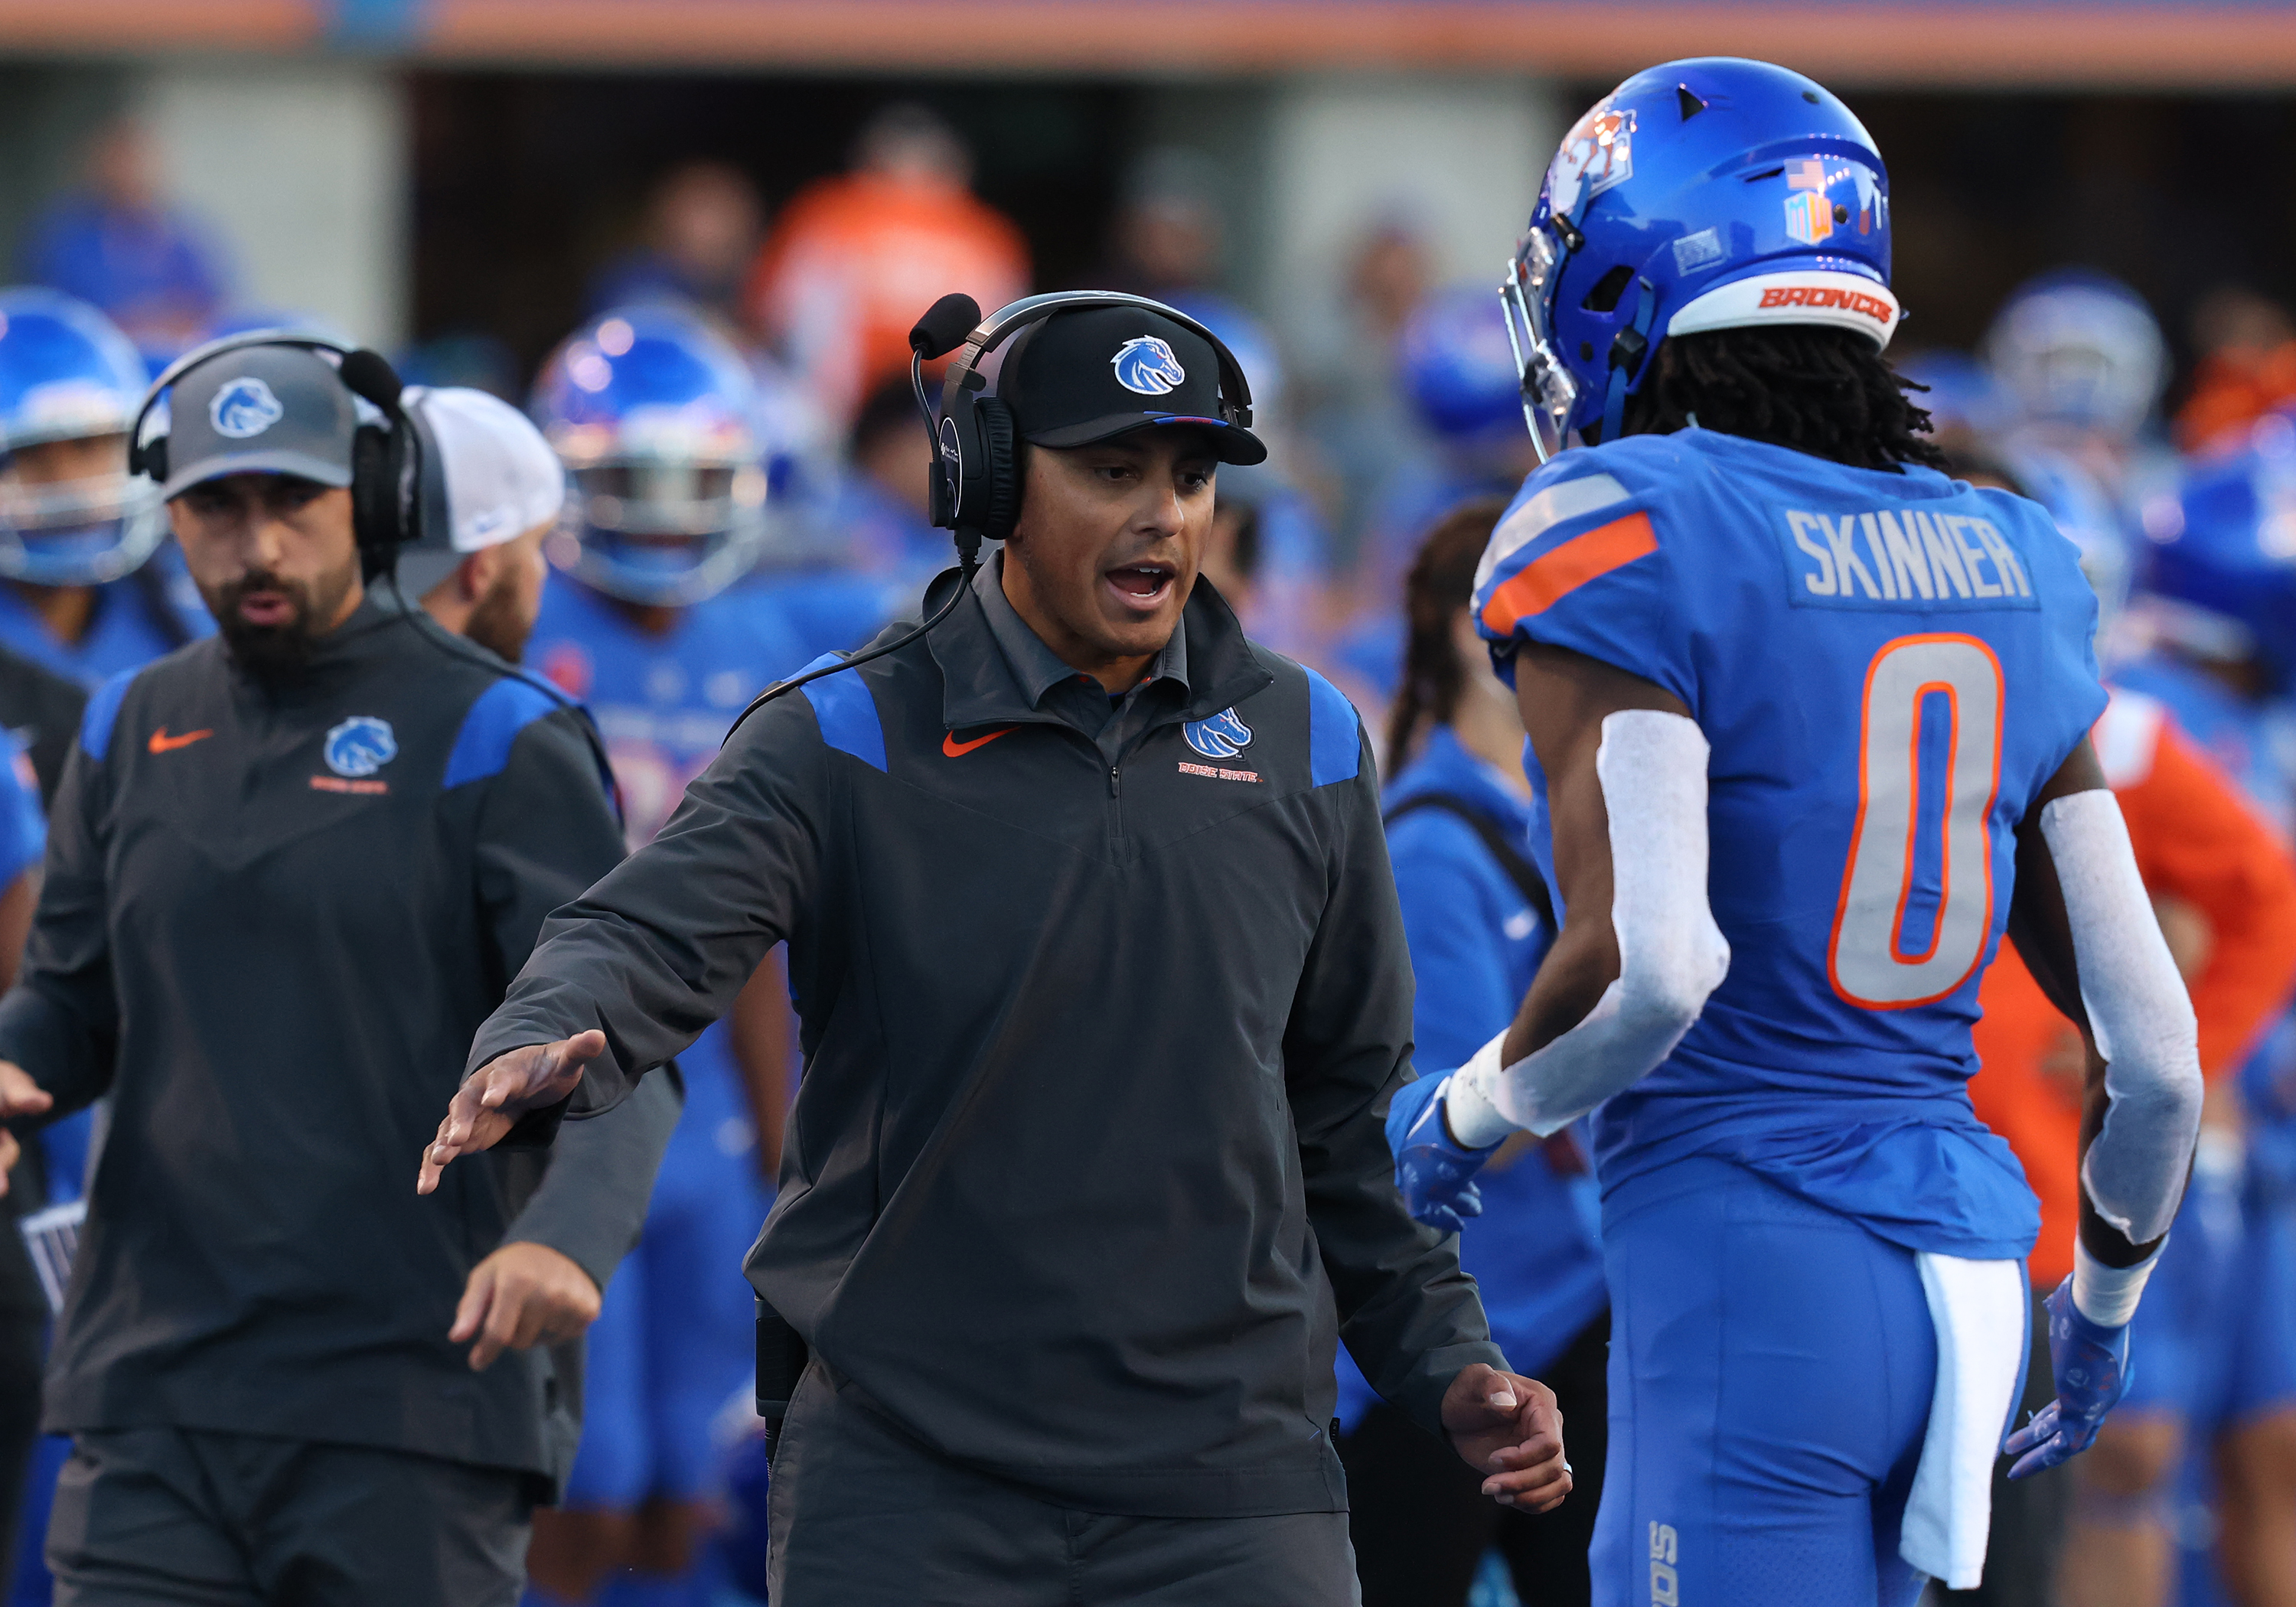 COLLEGE FOOTBALL: SEP 30 San Diego State at Boise State